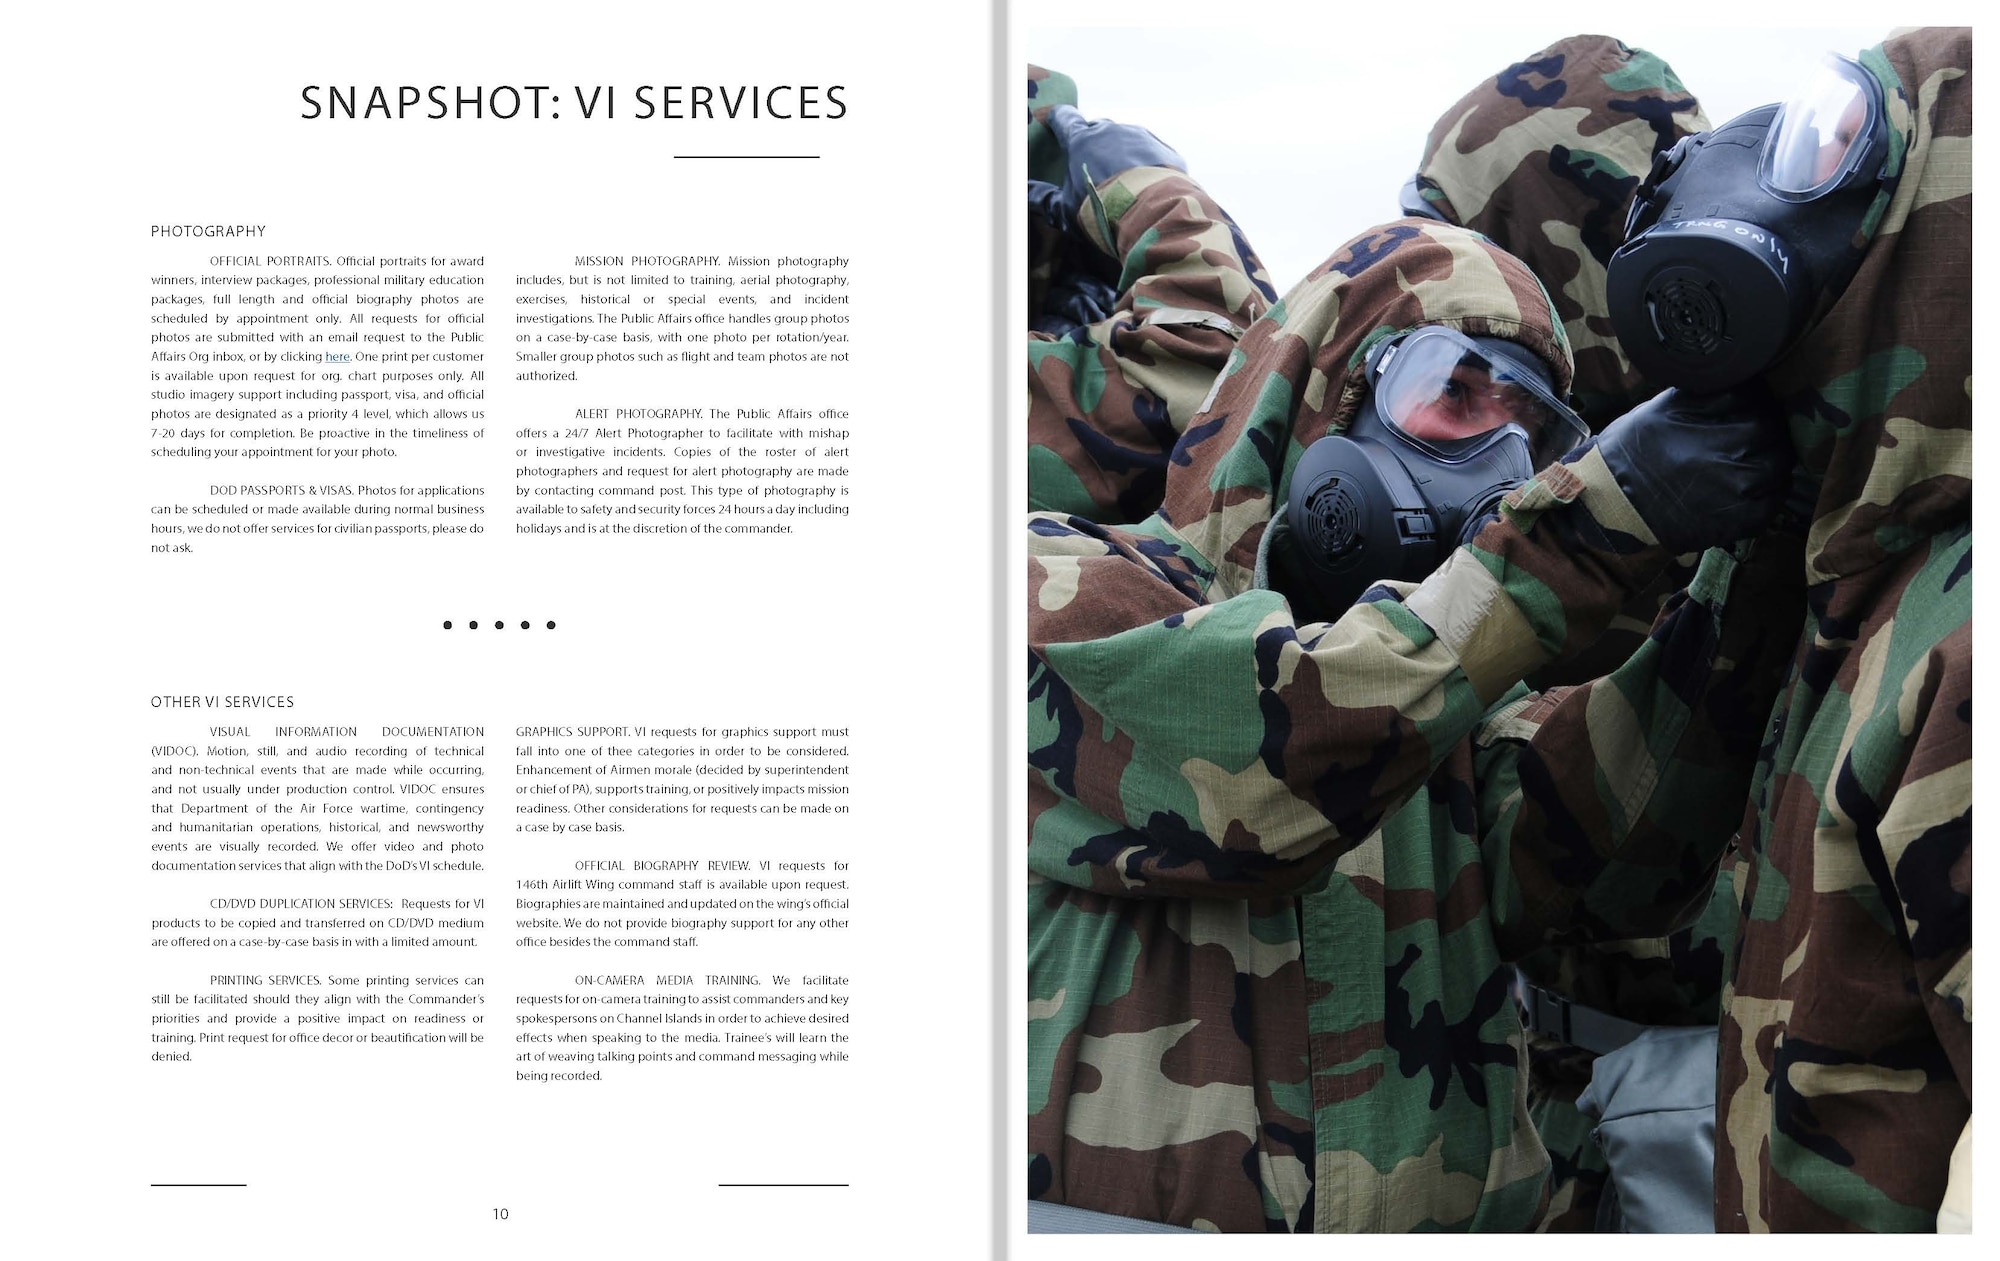 A magazine layout for the 146th Public Affairs Customer Service Guide